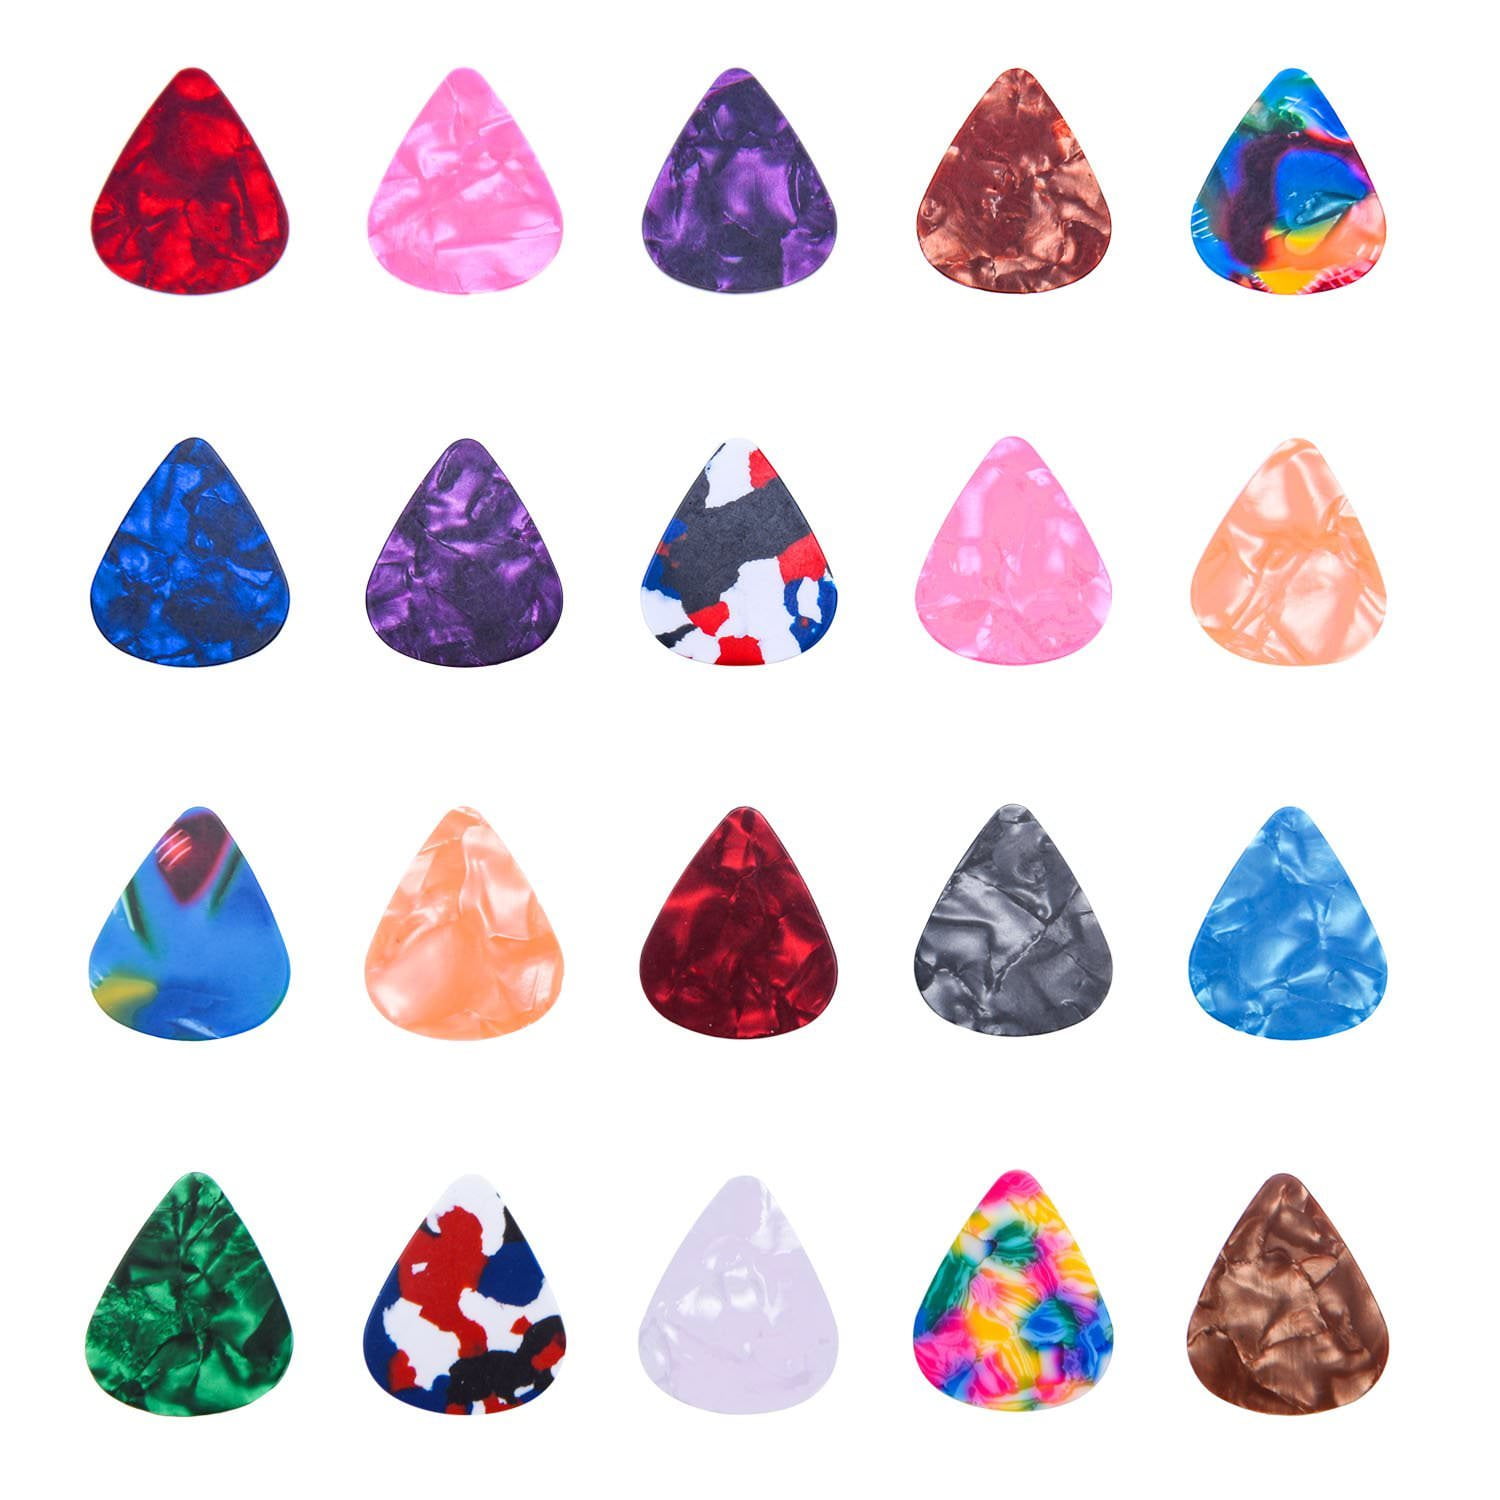 Gre-At Vapor-Wave 12 Pcs Guitar Picks Variety,Colroful Premium Celluloid Picks For Acoustic Electric Guitars Bass Or Ukulele,With Different Sizes Contain Thin,Medium & Thick Gauges 